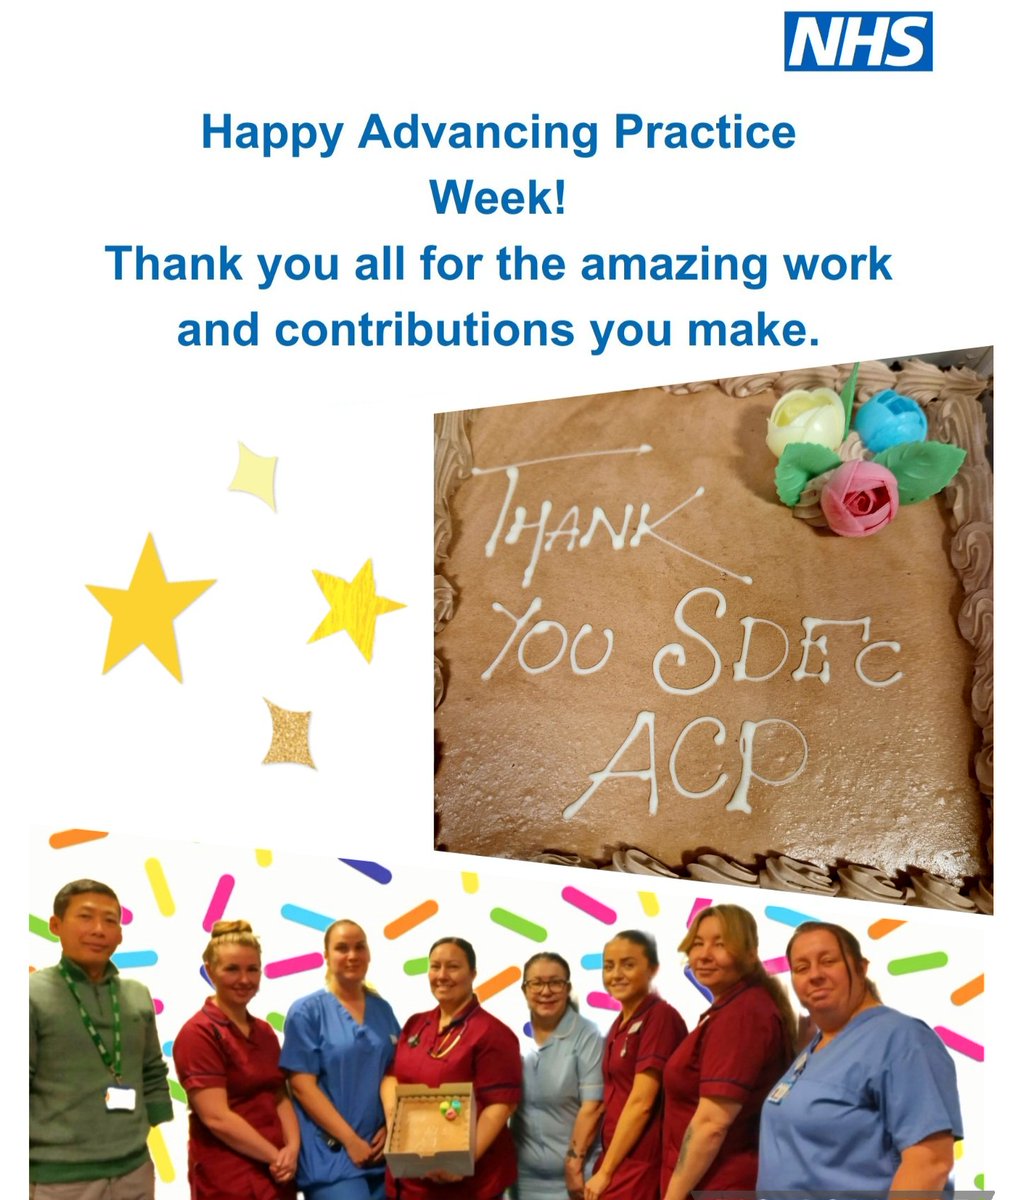 Our celebrations for #AdvancedPracticeWeek have continued today! A huge thank you to all our colleagues whose amazing work contributes so significantly to us delivering excellent patient outcomes and experience! #MYTeam #NHS #AcuteCare